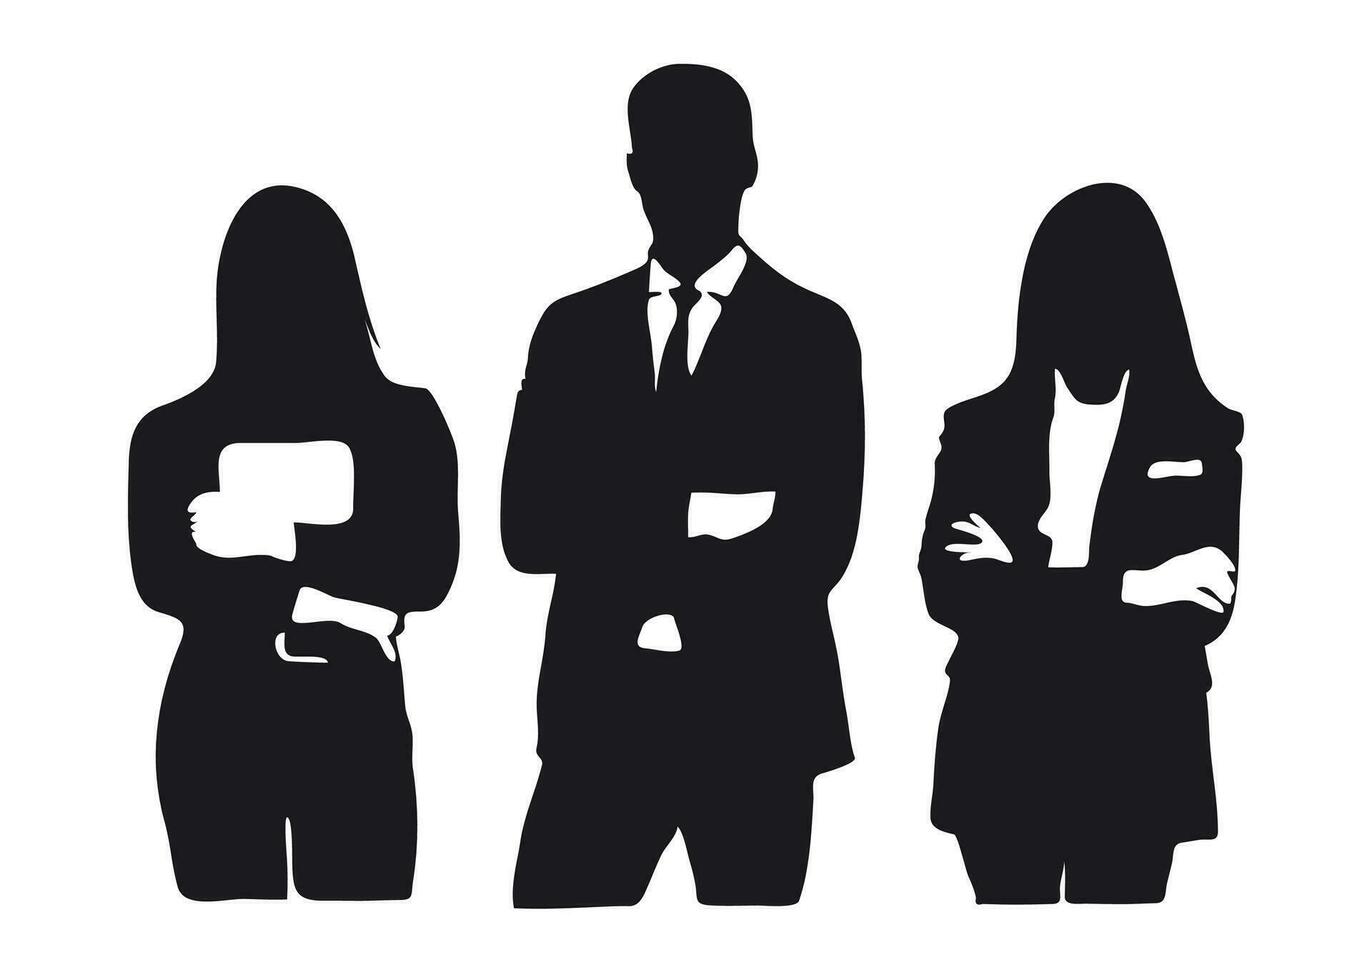 Silhouette of businesspeople, both men and women, in various poses. Silhouette business collection. vector